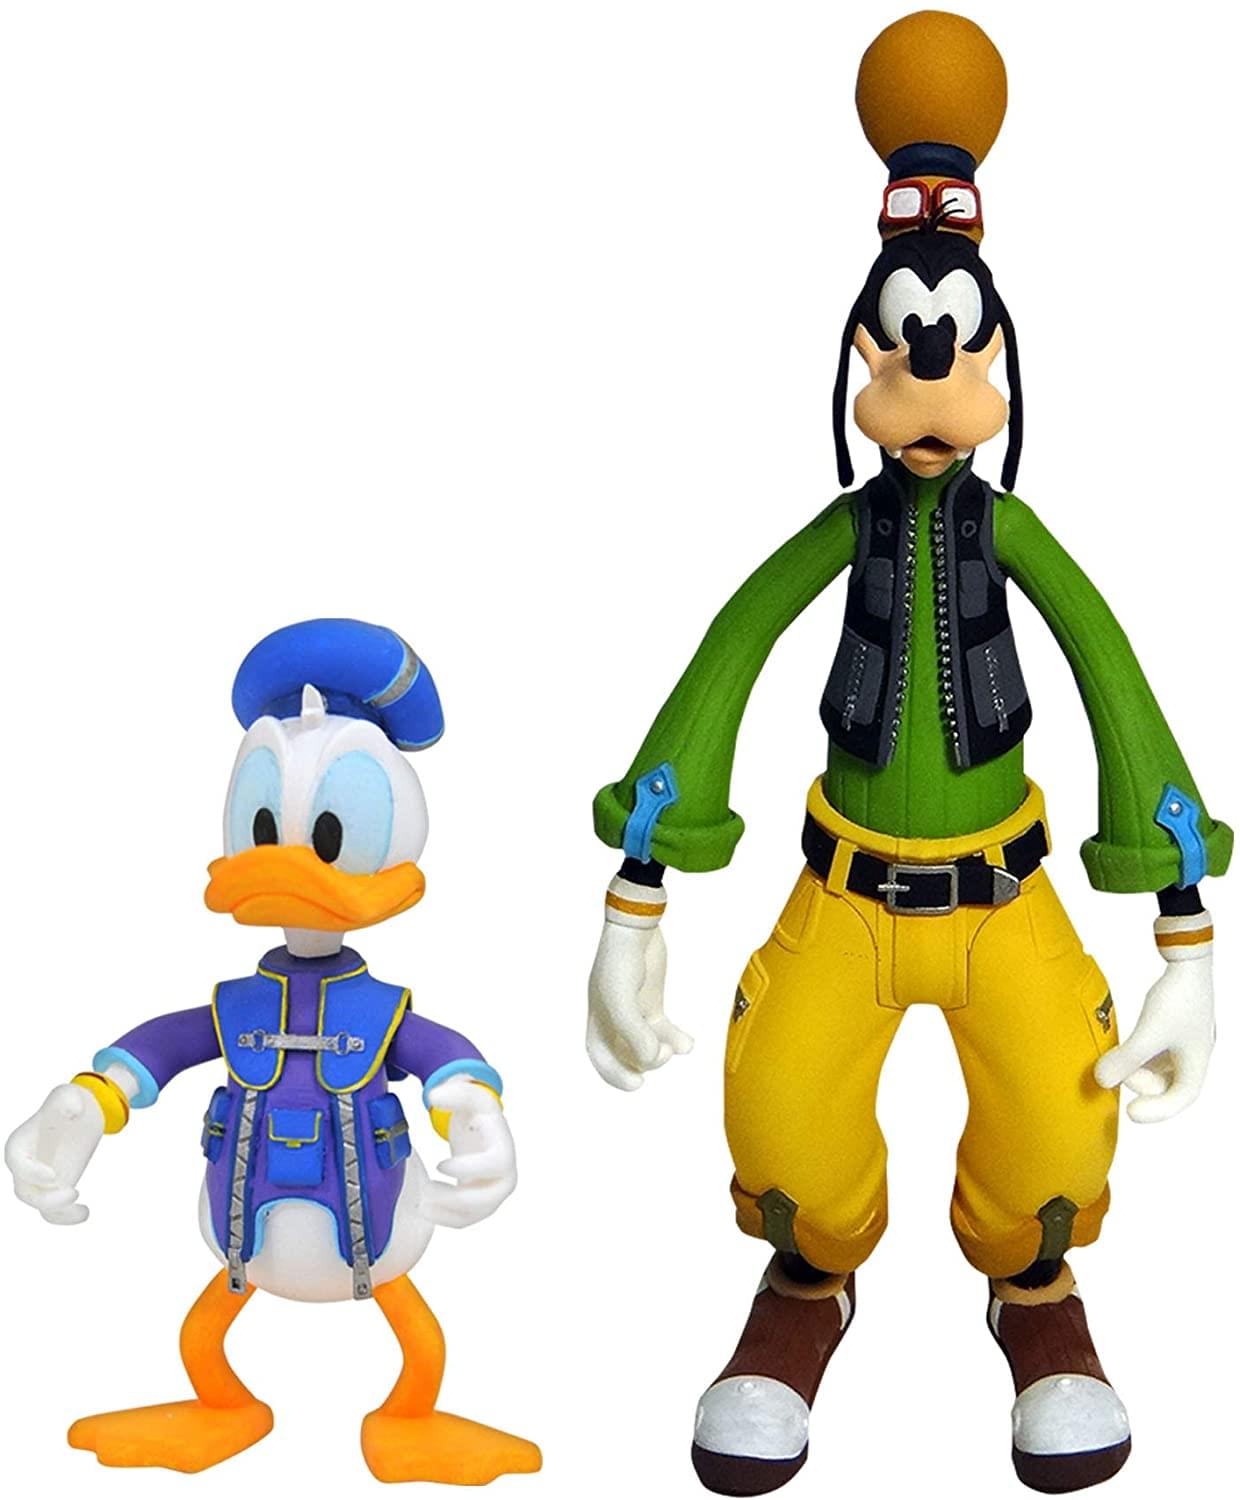 Kingdom Hearts 3 Select Action Figure 2-Pack | Goofy & Donald